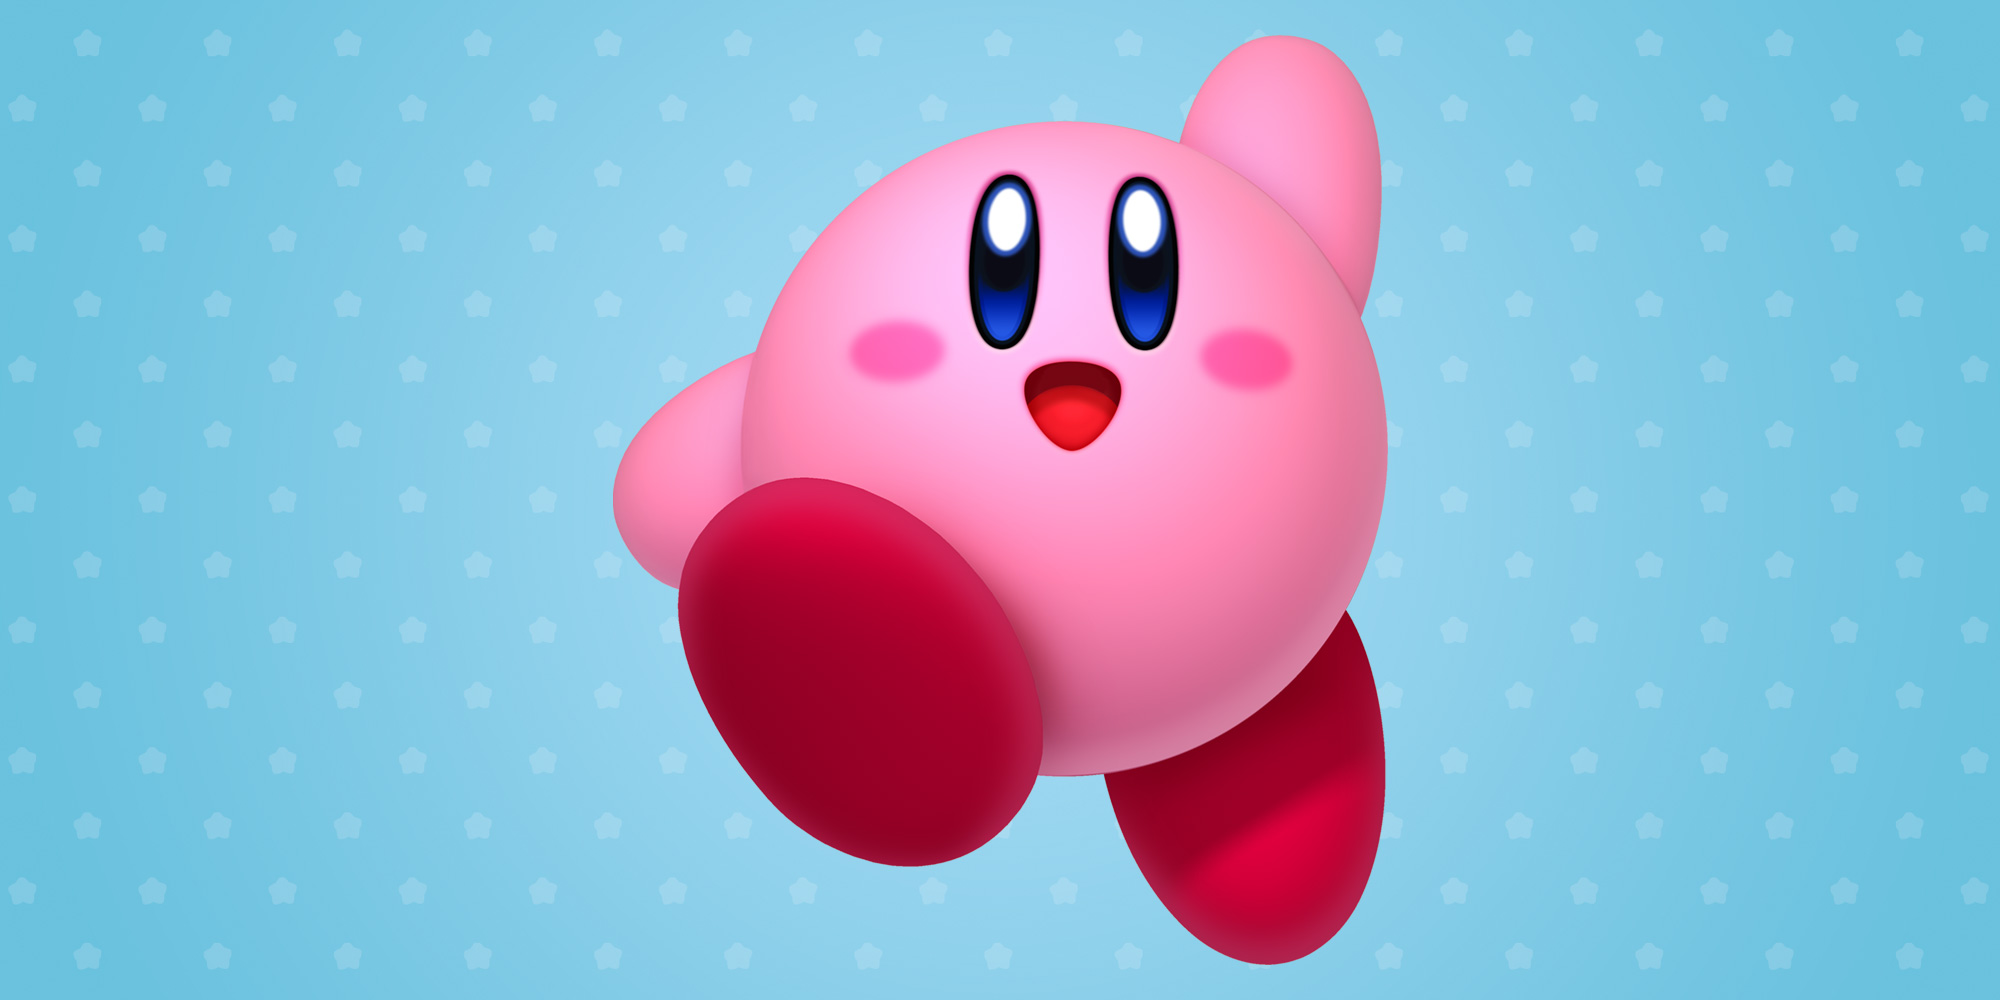 most over-powered characters - Kirby